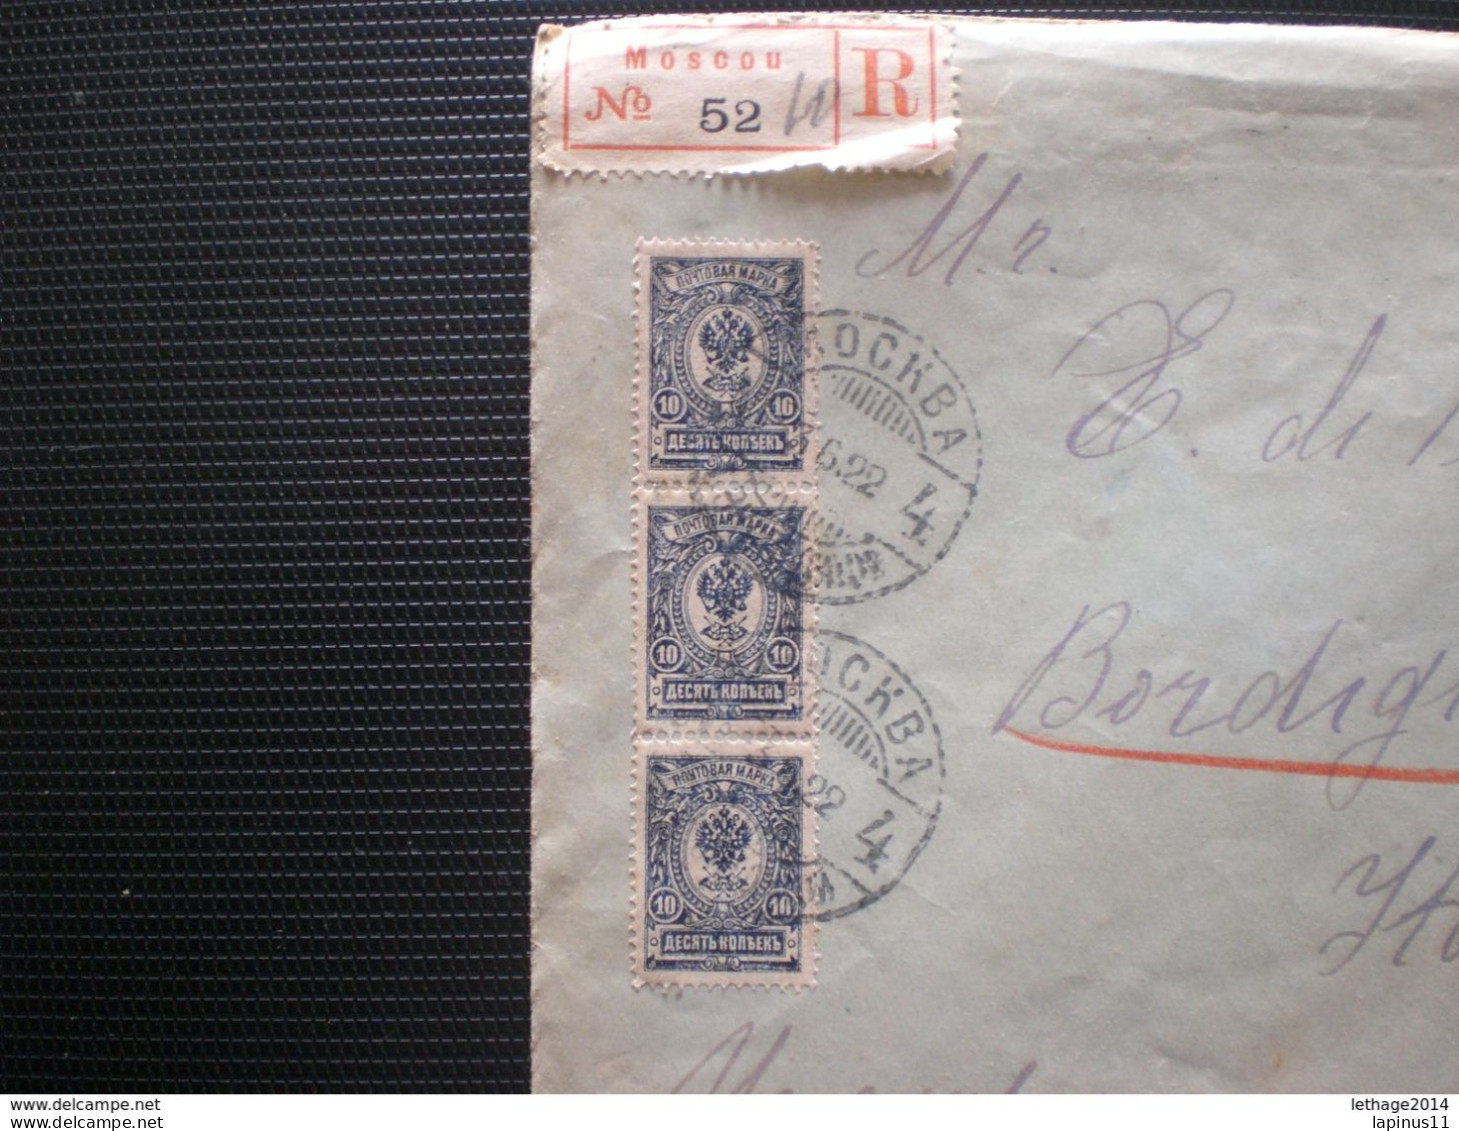 RUSSIA RUSSIE РОССИЯ STAMPS COVER 1922 REGISTER MAIL RUSSIE TO ITALY RRR RIF.TAGG. (78) - Covers & Documents